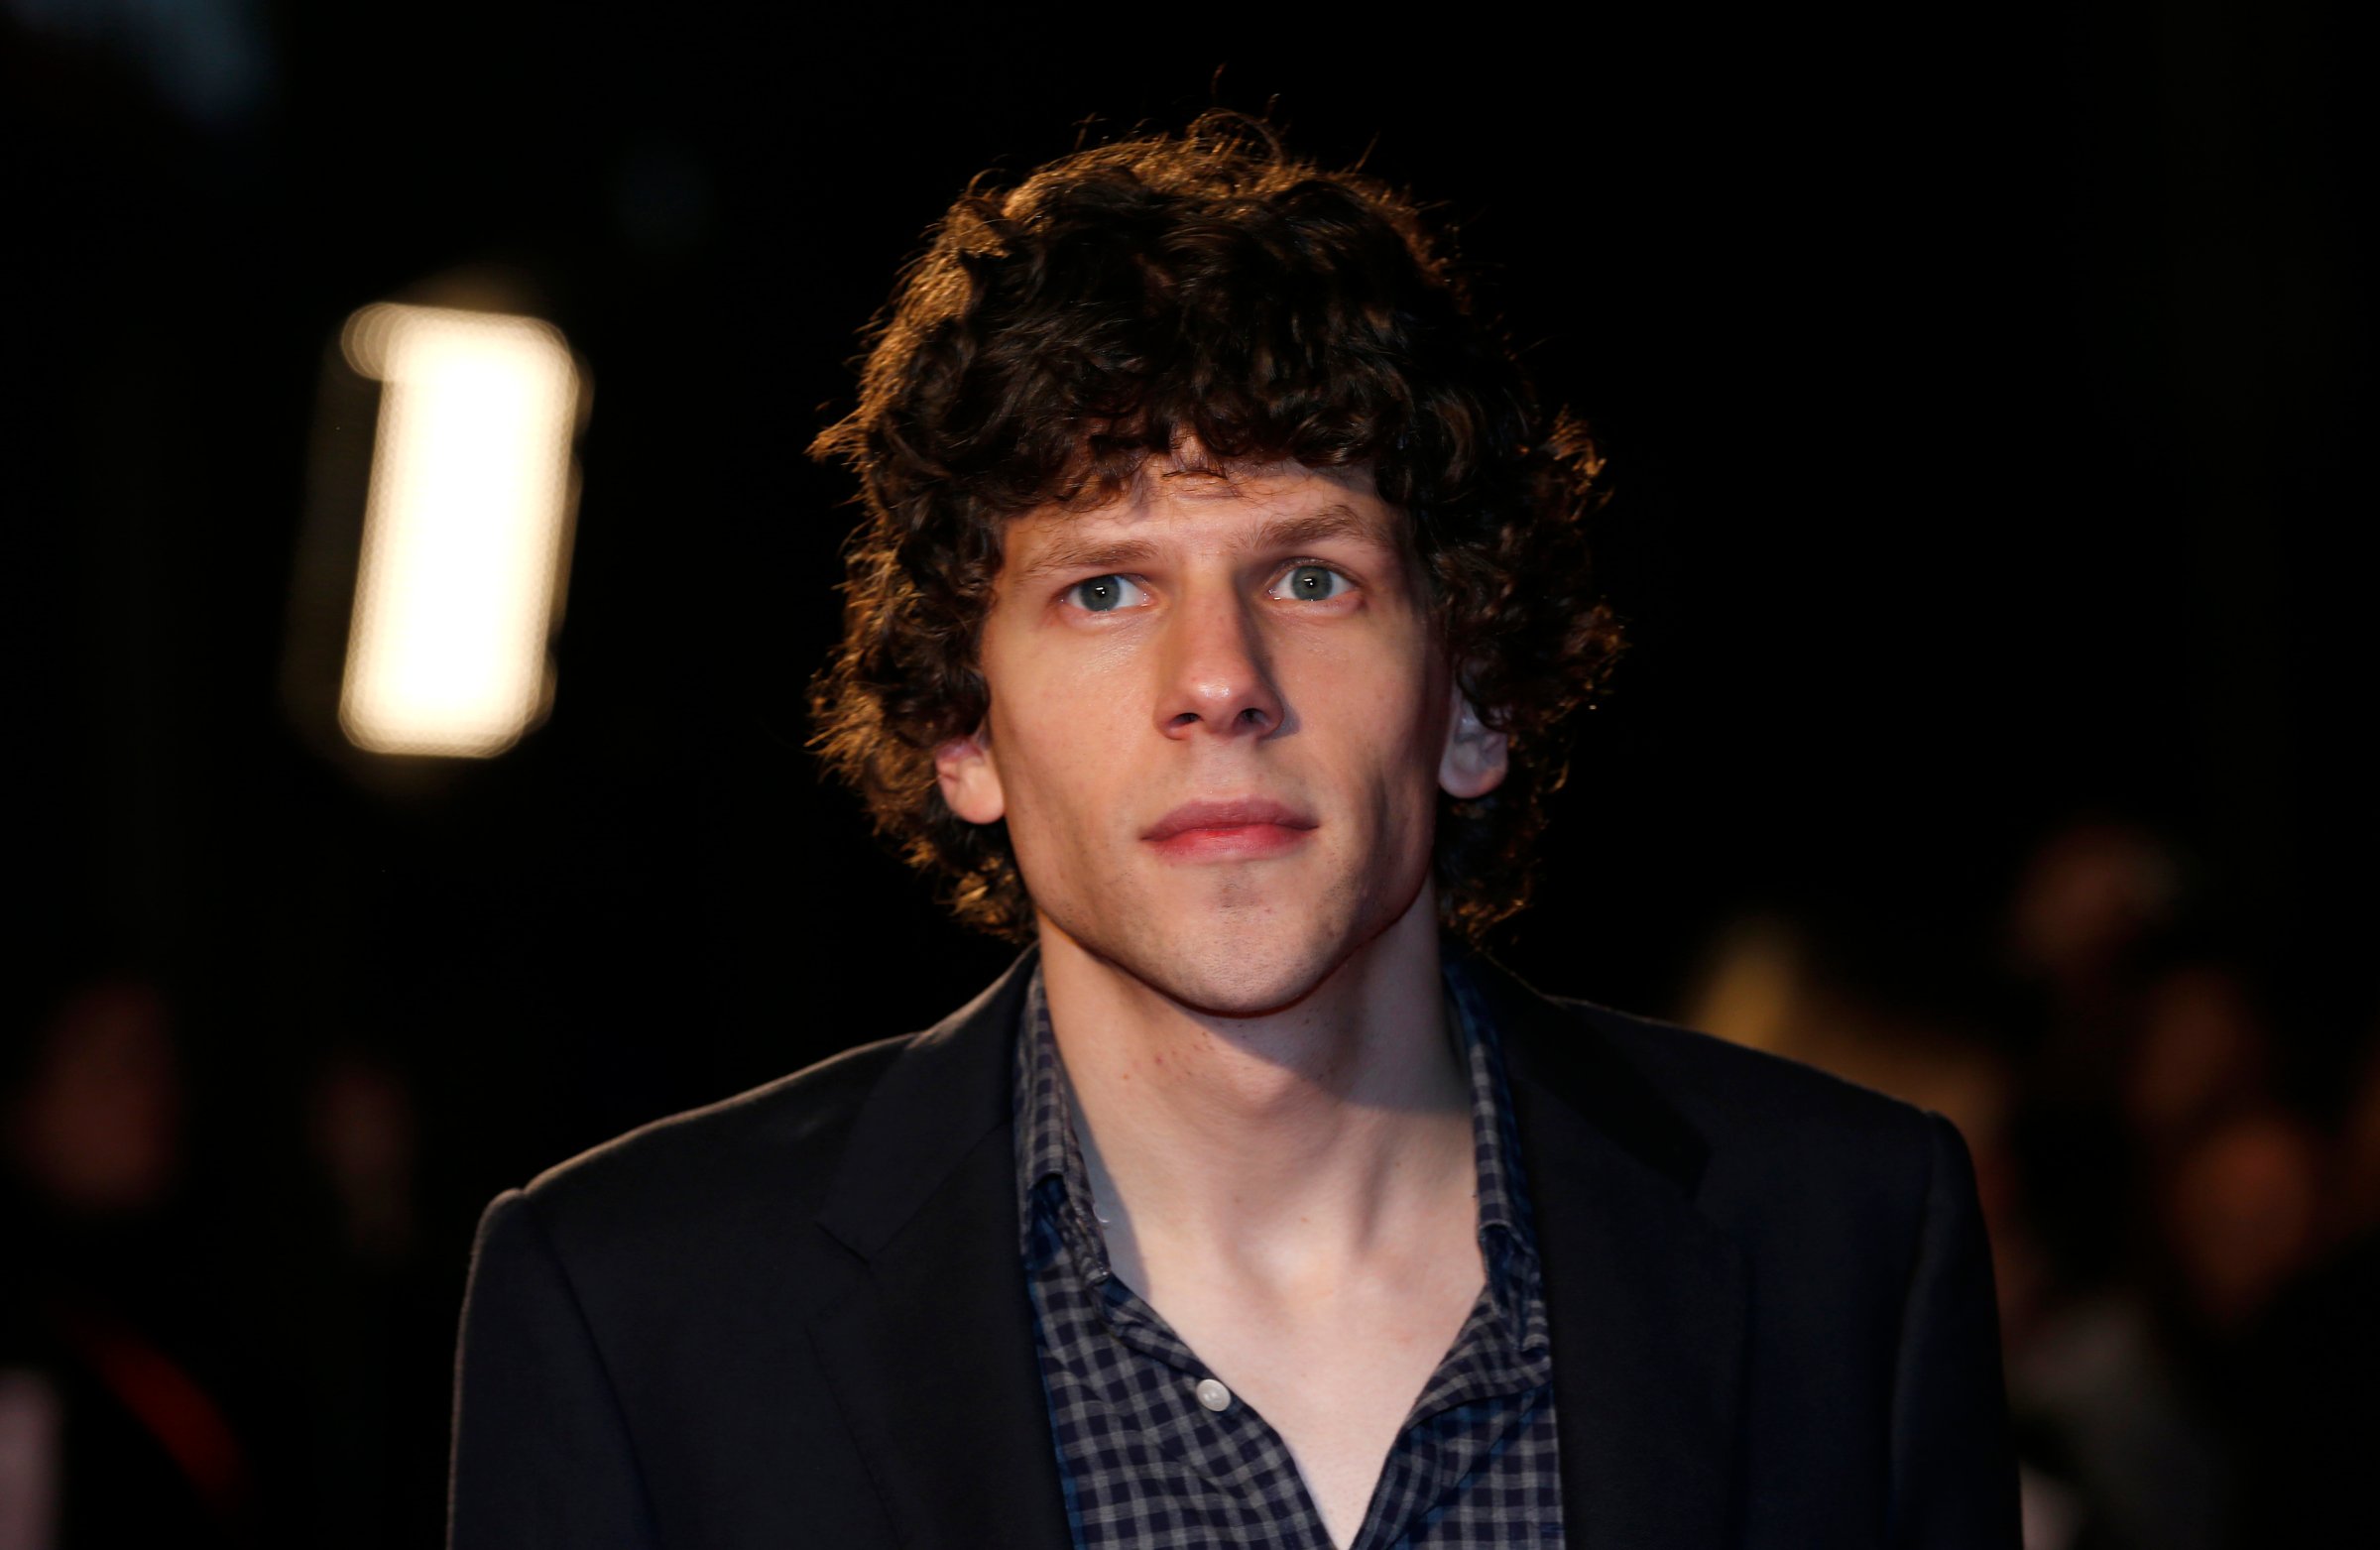 Cast member Eisenberg arrives for the European premiere of "The Double" at the London Film Festival, at the Odeon West End, in central London